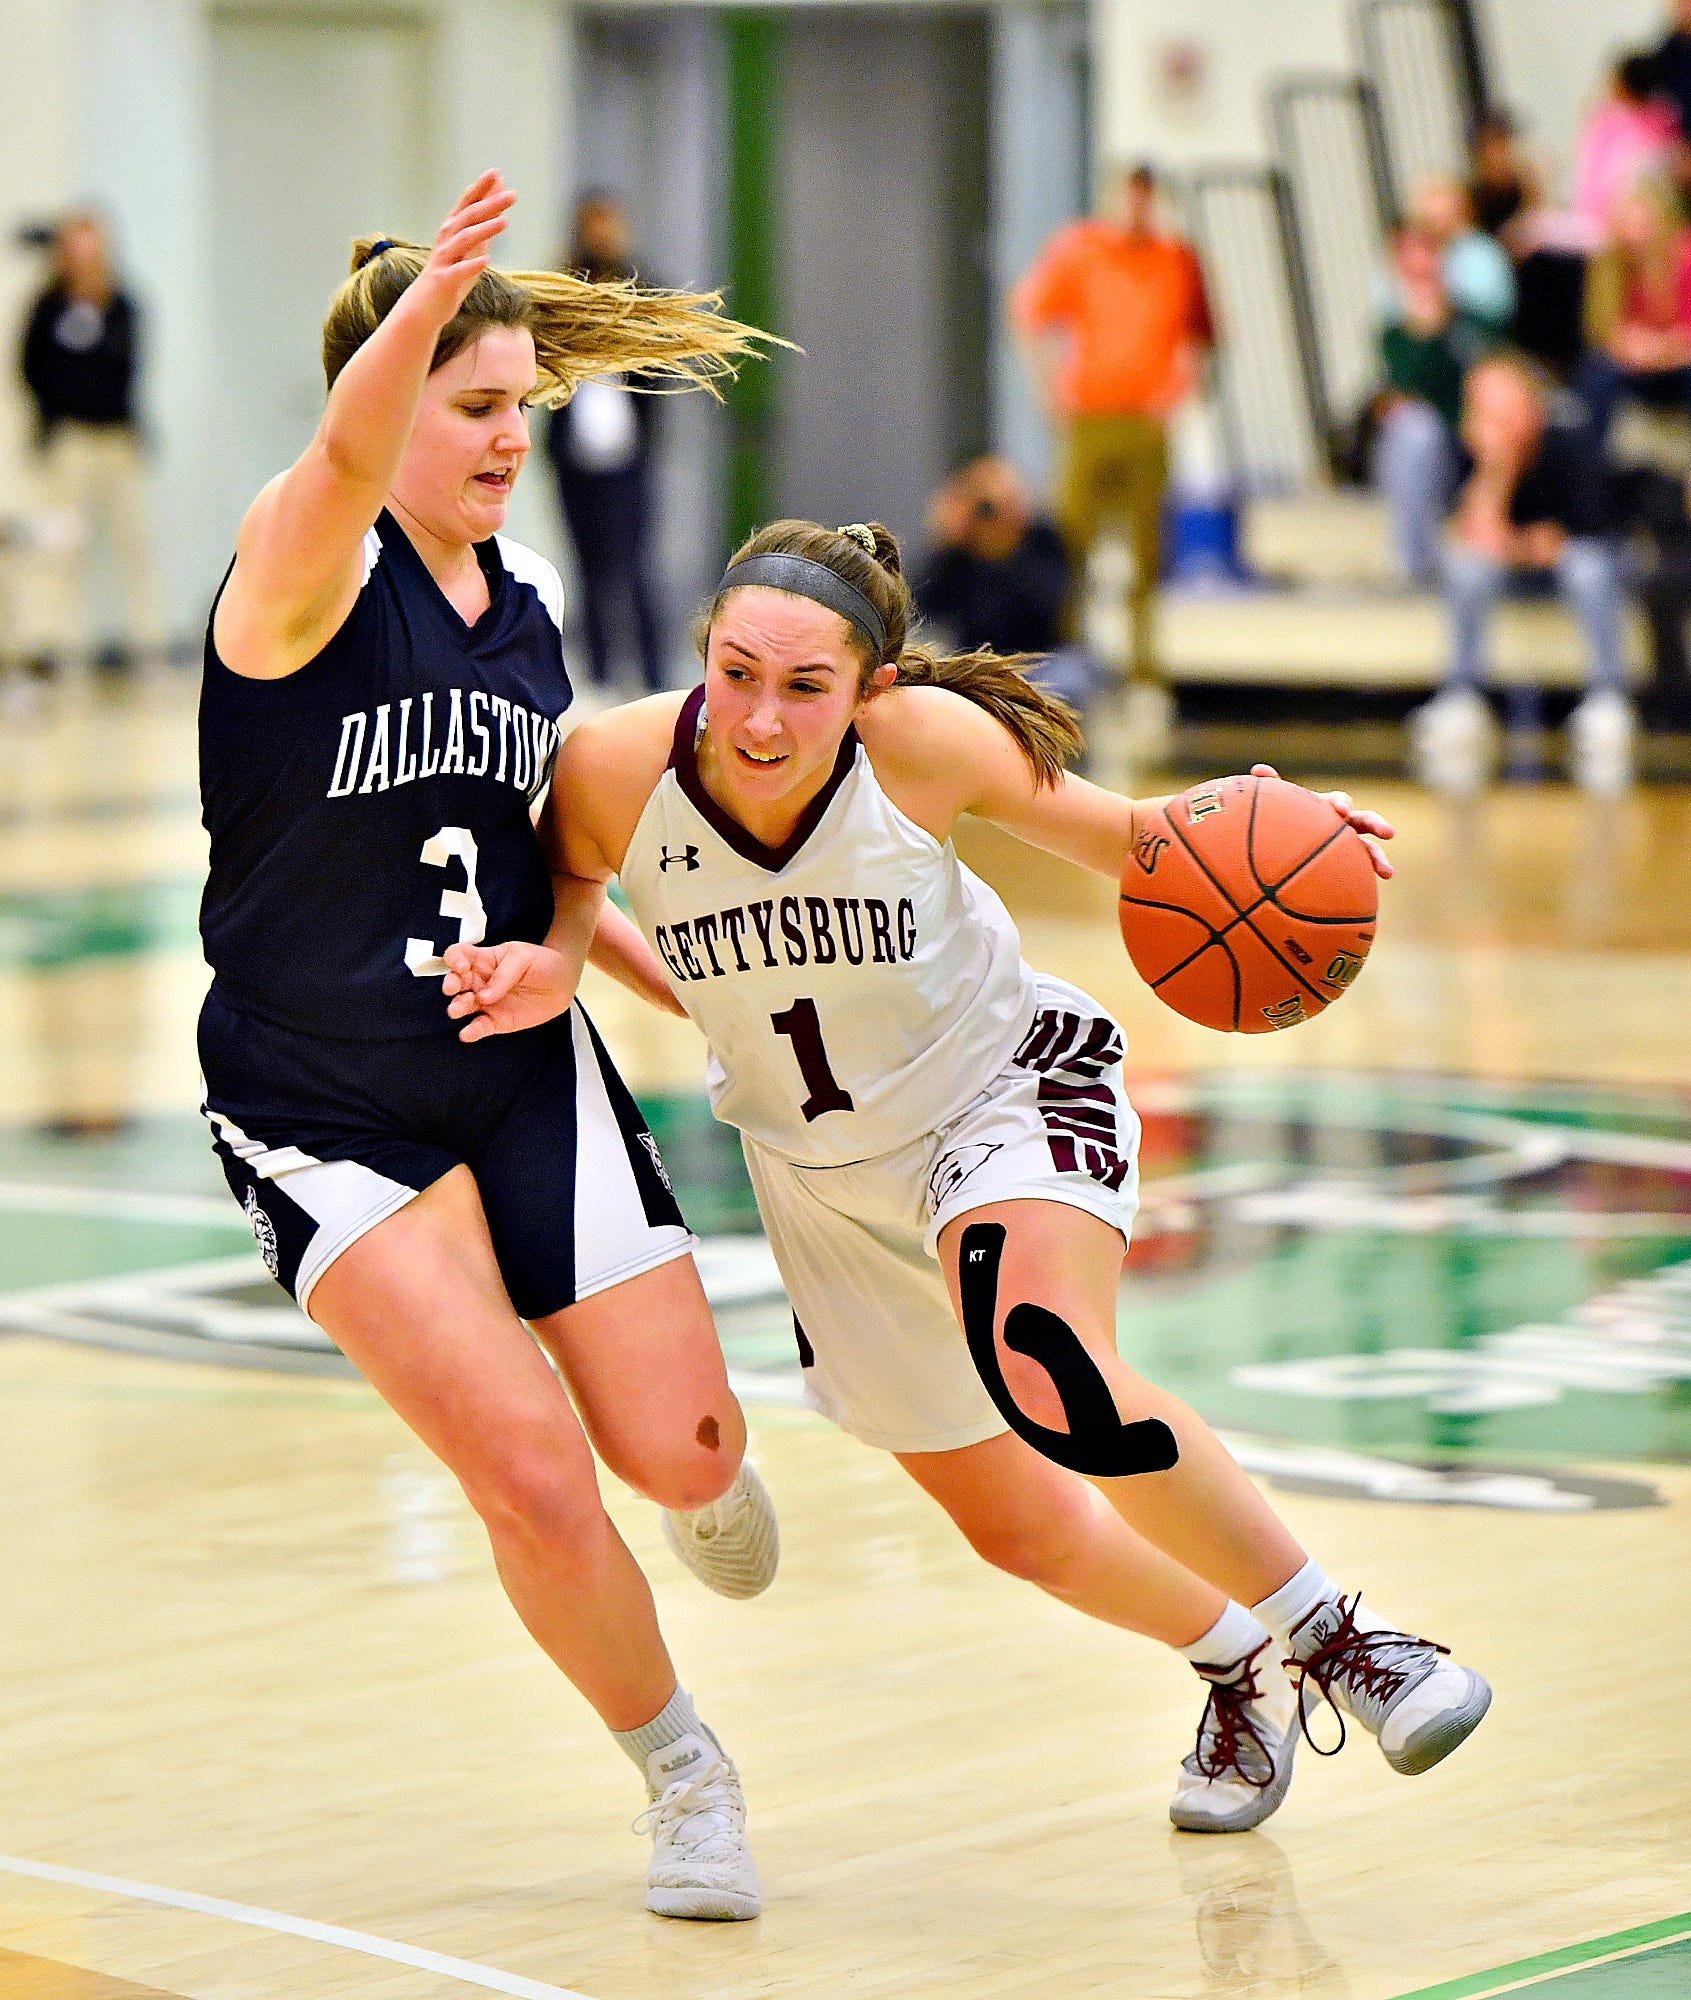 Gettysburg's Camryn Felix, right, works to get around Dallastown's Claire Teyral during YAIAA girls' basketball championship action at Grumbacher Sport and Fitness Center at York College of Pennsylvania in Spring Garden Township, Friday, Feb. 14, 2020. Dawn J. Sagert photo